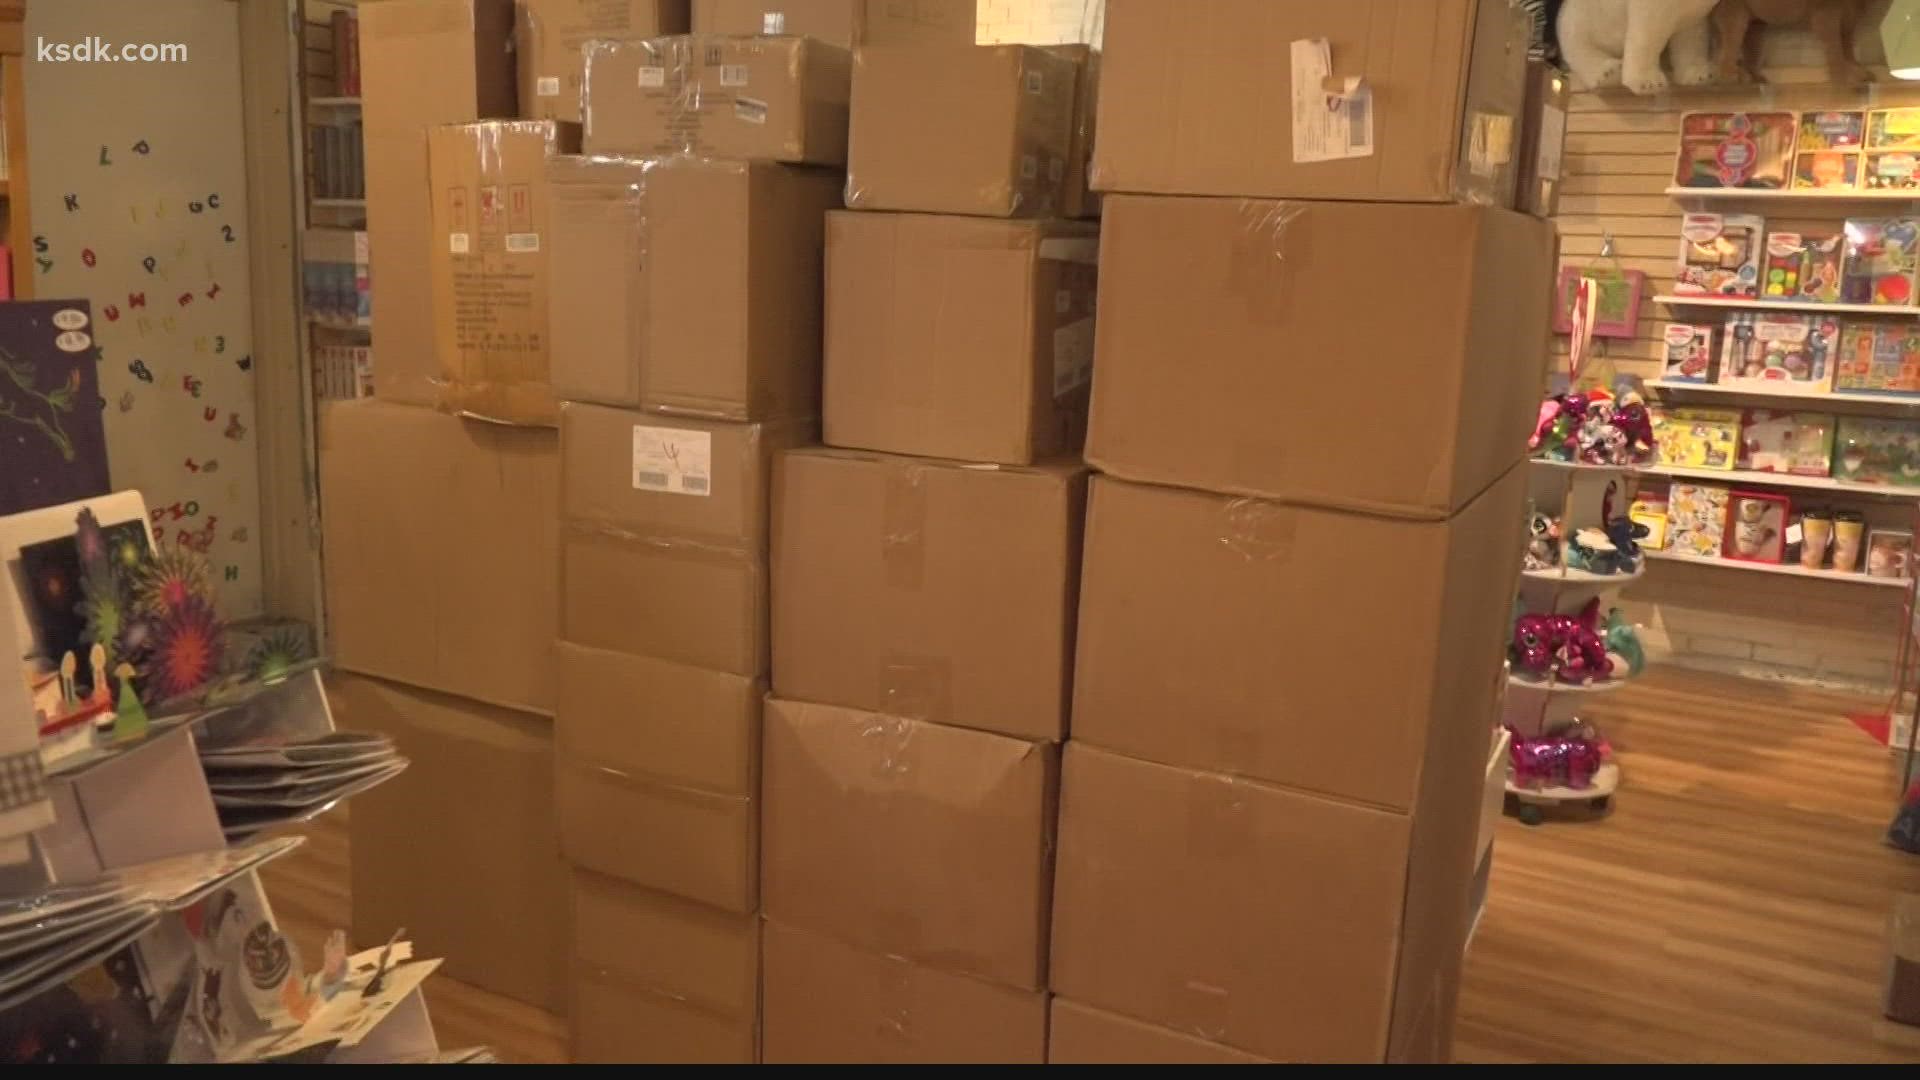 The supply chain shortages have a domino effect on businesses in the St. Louis area.